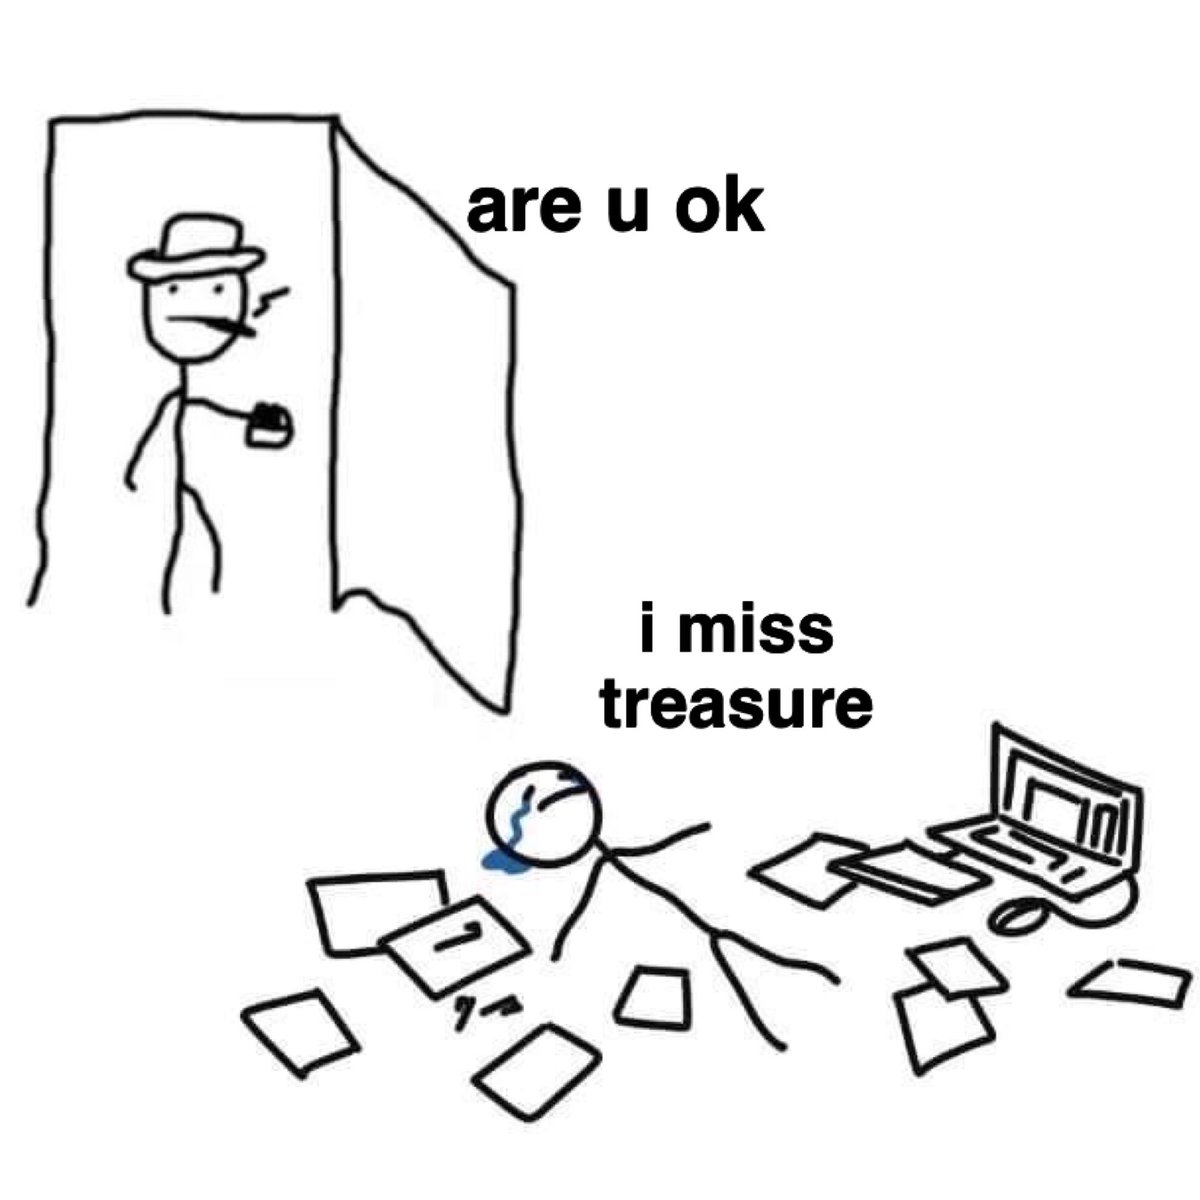 *cries in treasure deprived*